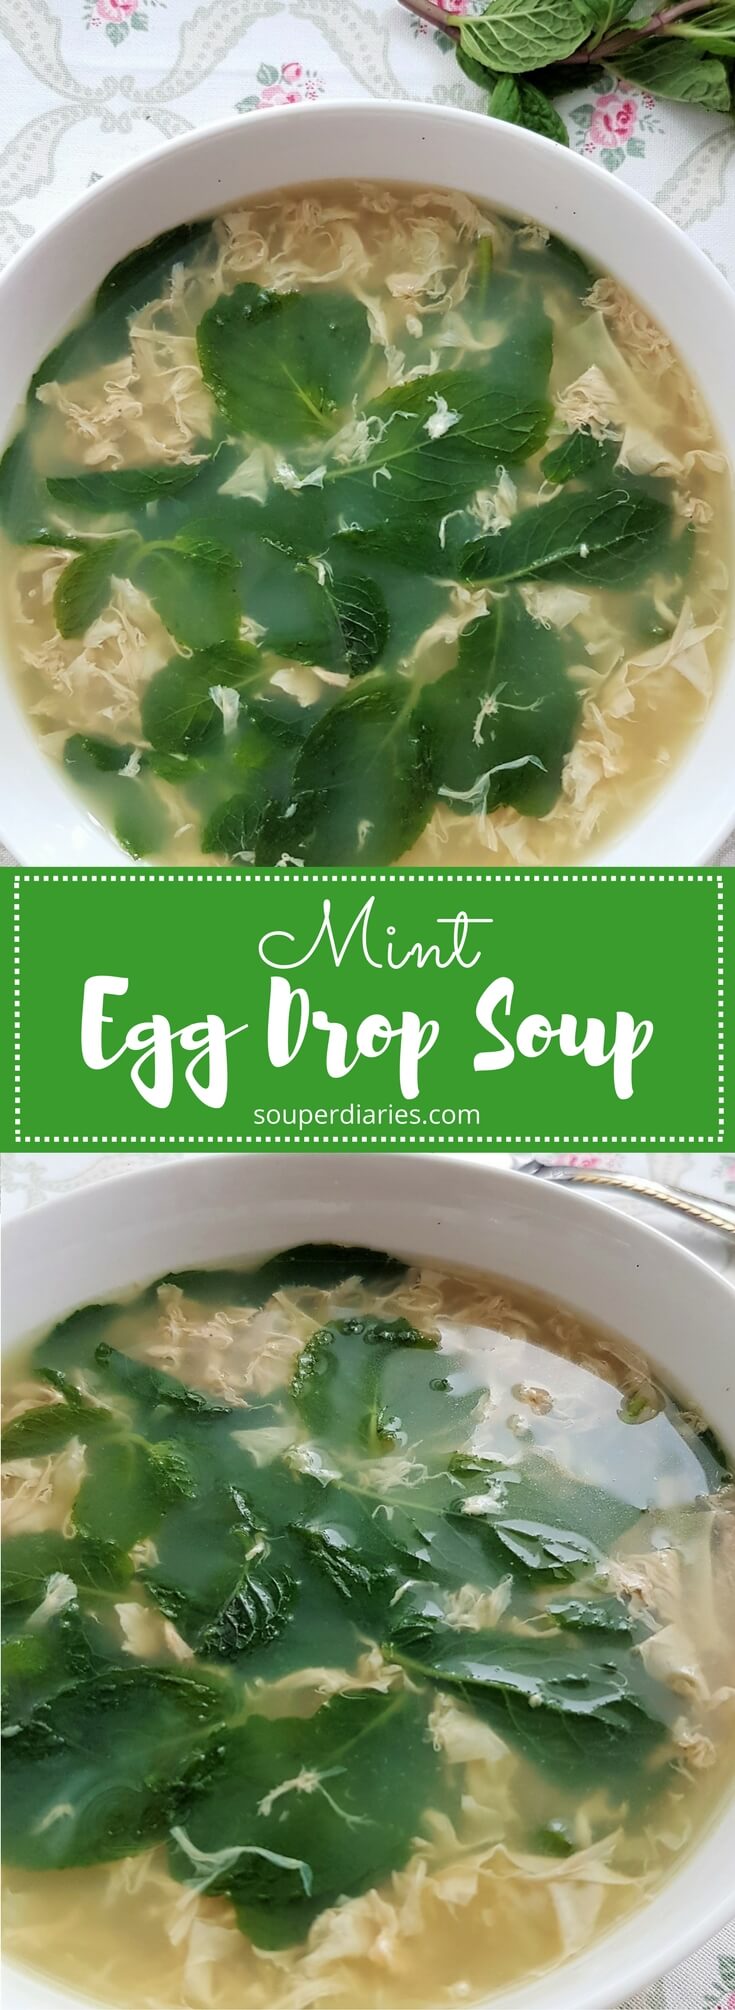 Simple egg drop soup recipe with mint